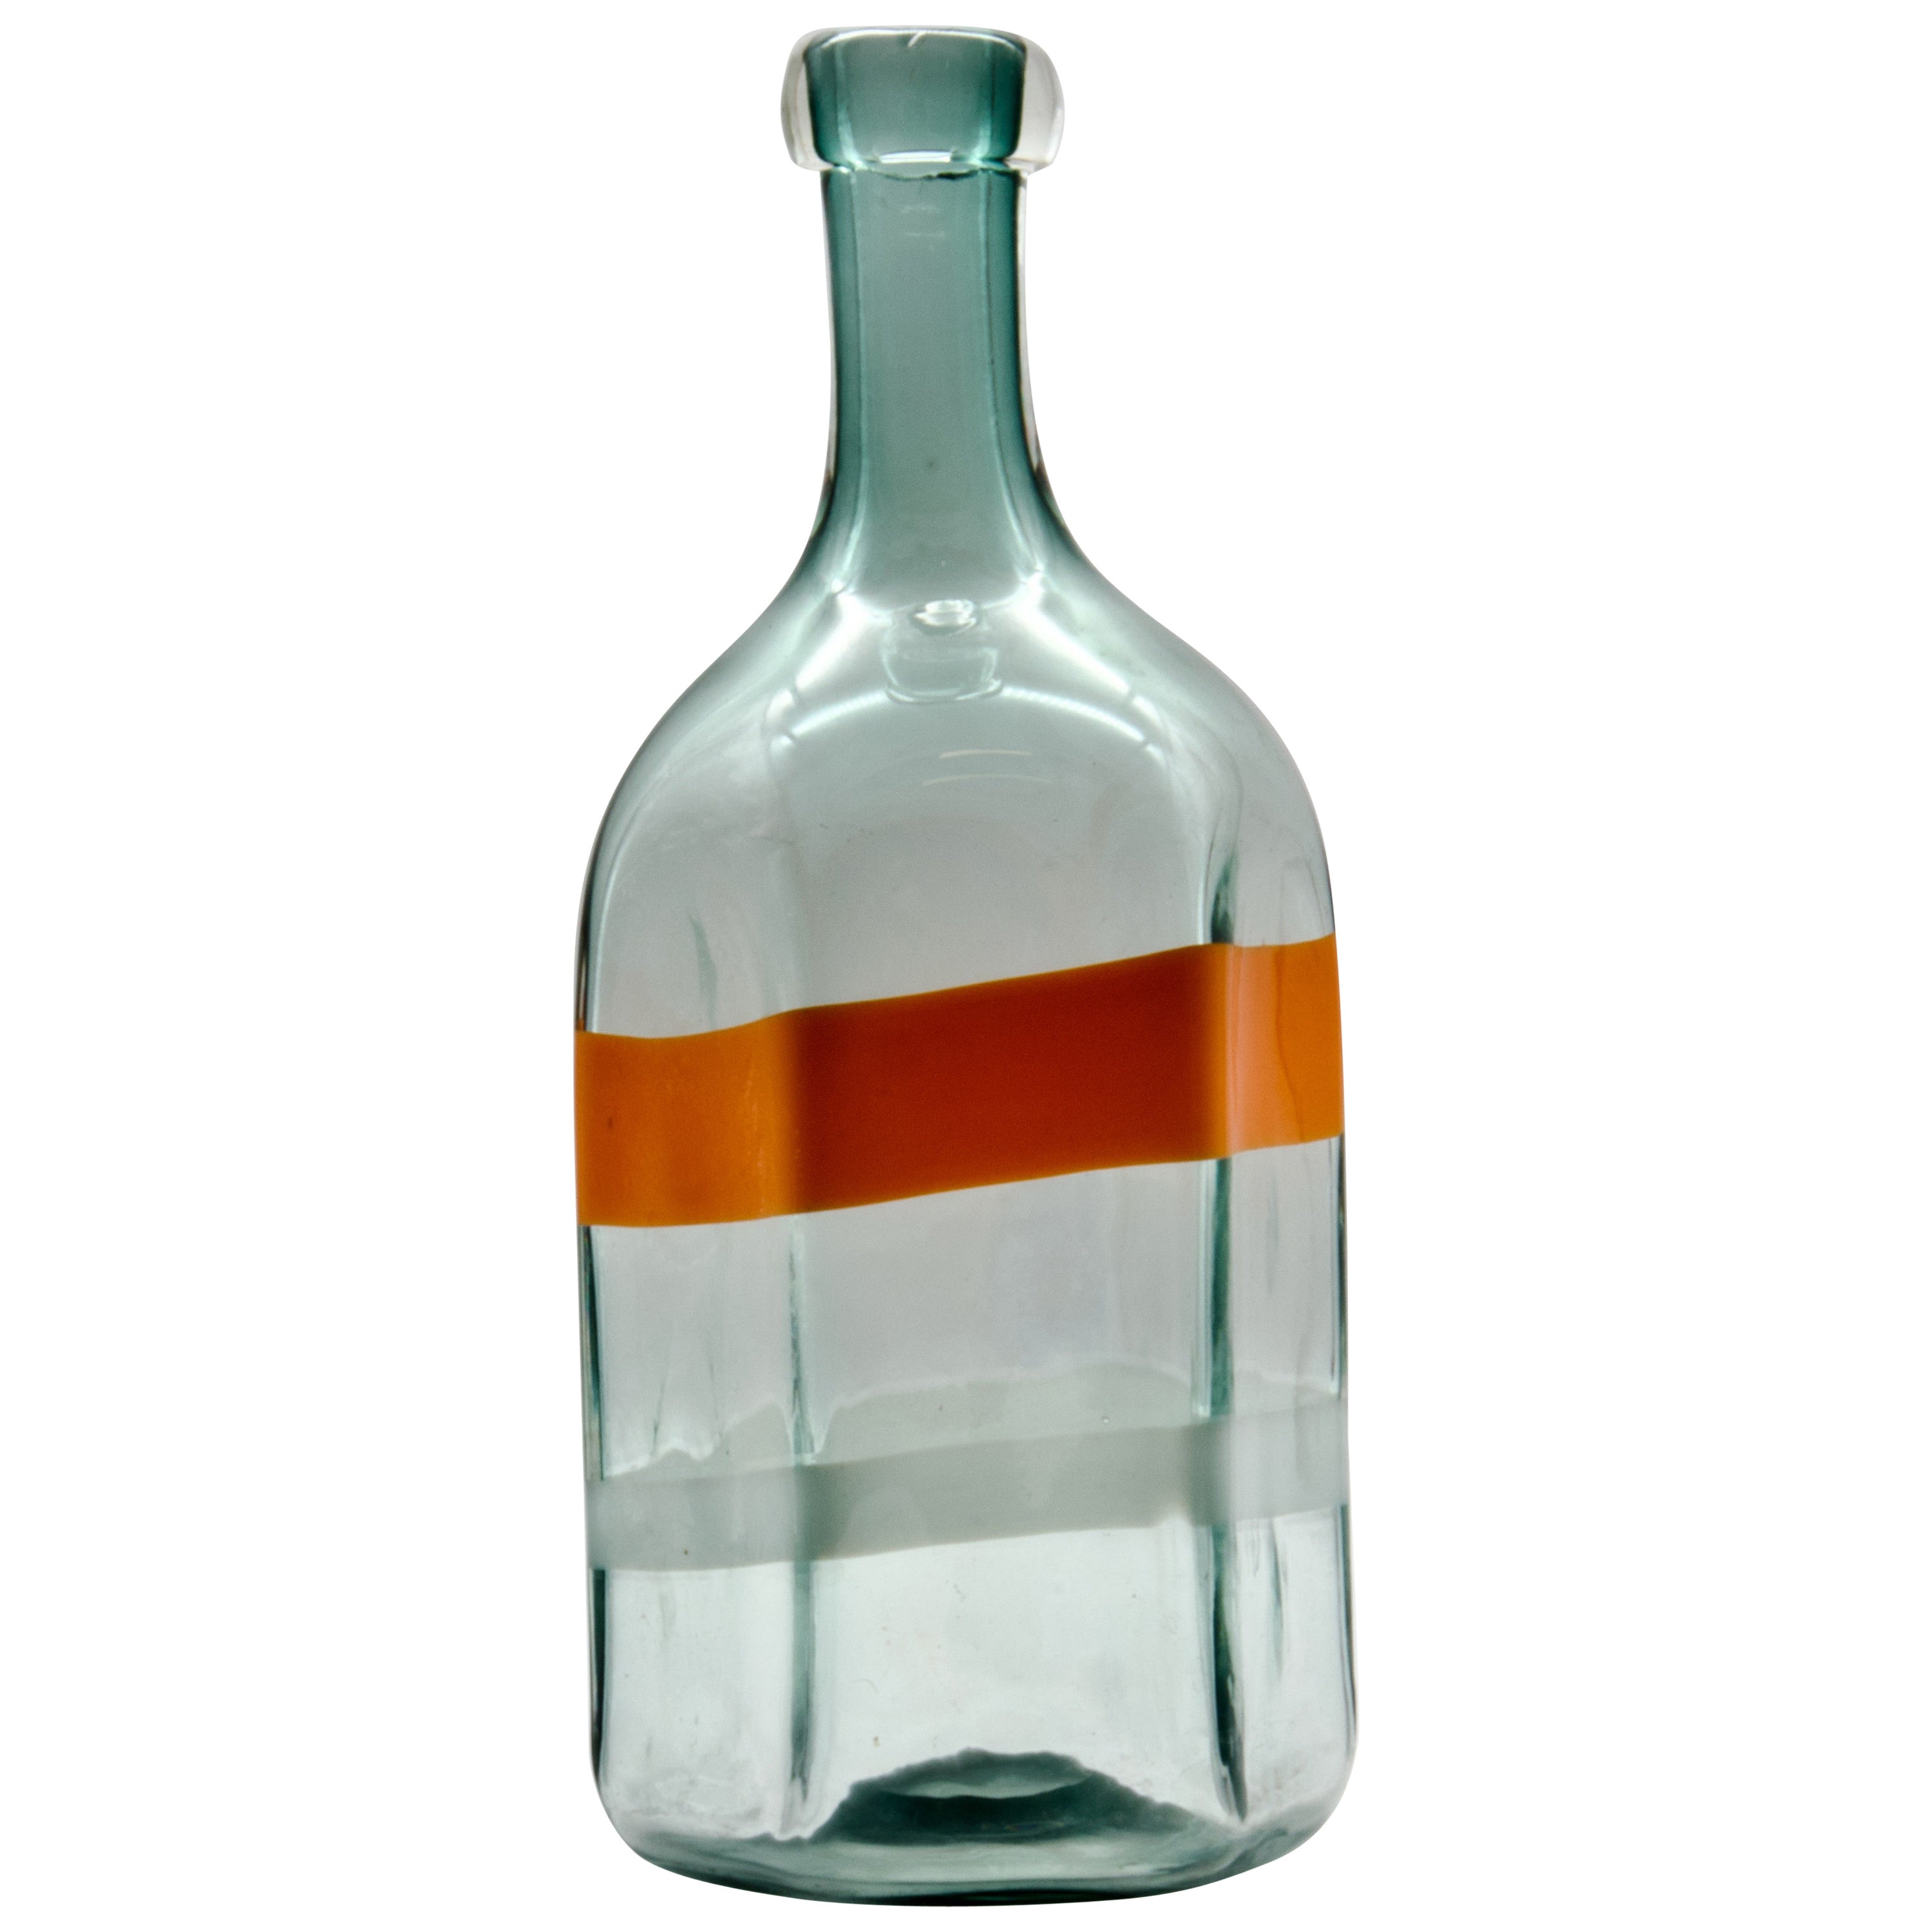 Large Murano Glass Bottle or Vase by La Murrina, Italy